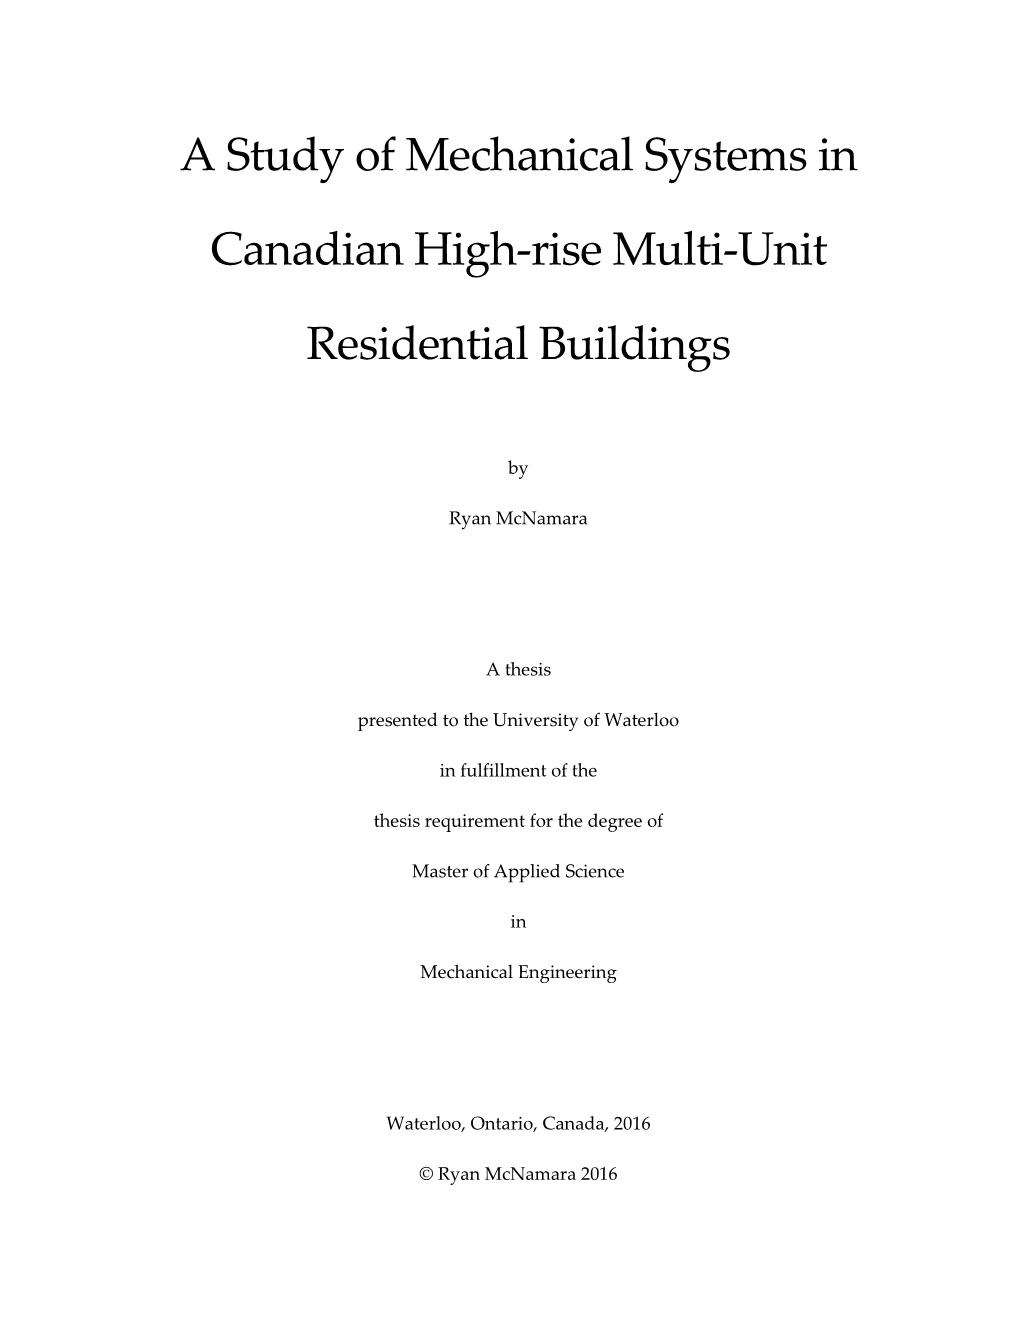 A Study of Mechanical Systems in Canadian High-Rise Multi-Unit